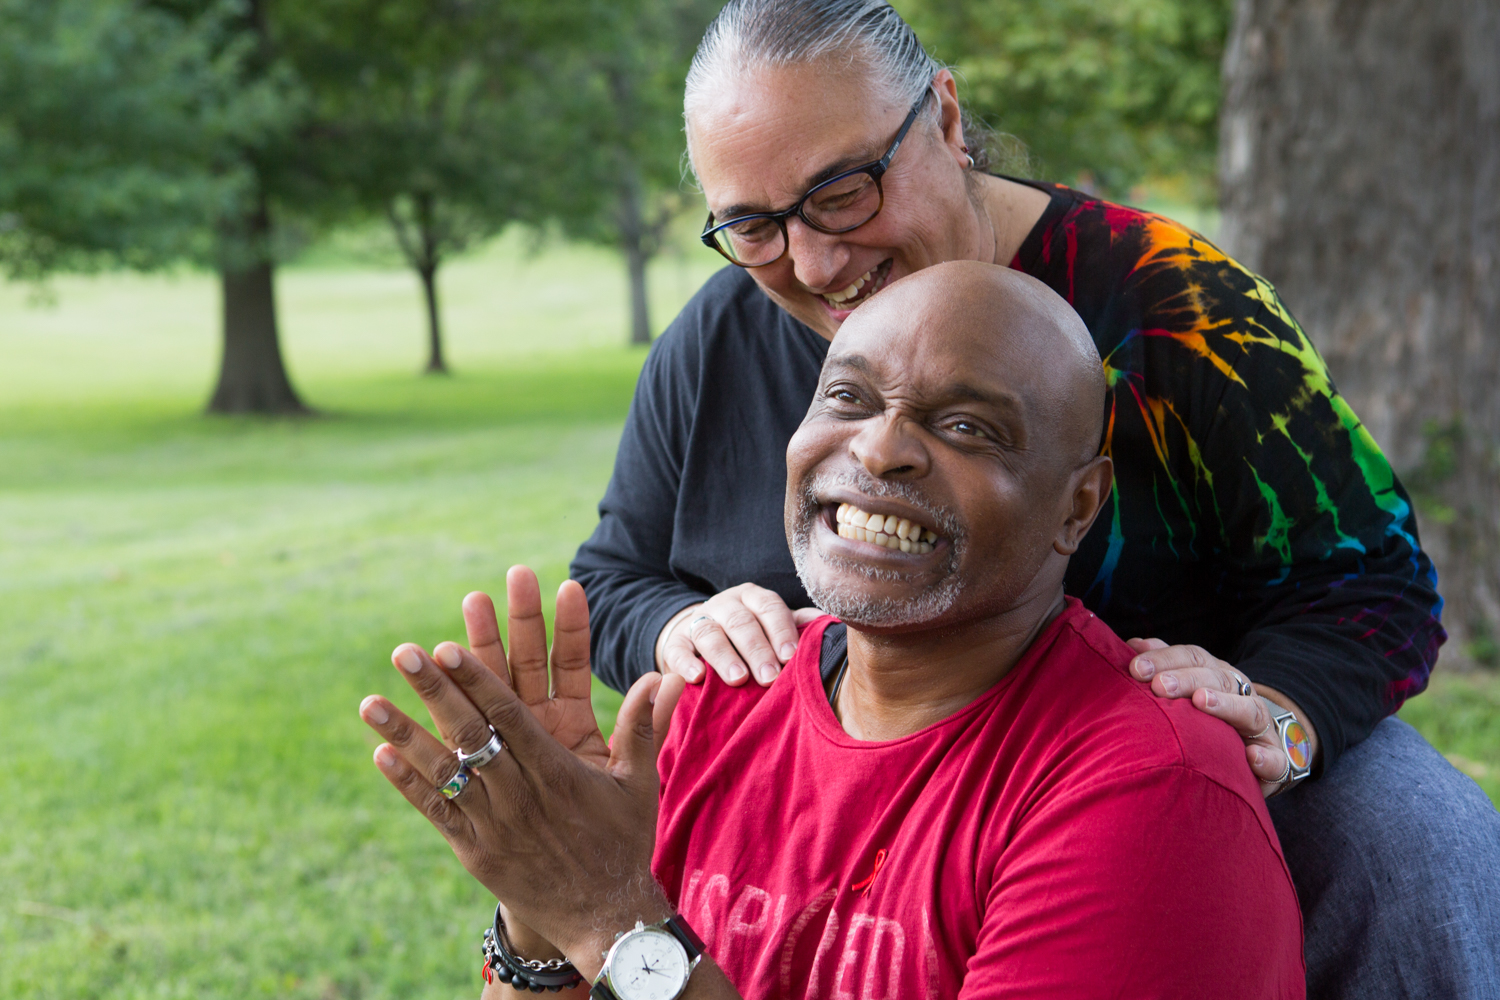  Carlton Smith (front) poses for a portrait with Monte Ephraim at Druid Hill Park in Baltimore, Maryland during a National Faith HIV &amp; AIDS Awareness Day Walk.&nbsp; 